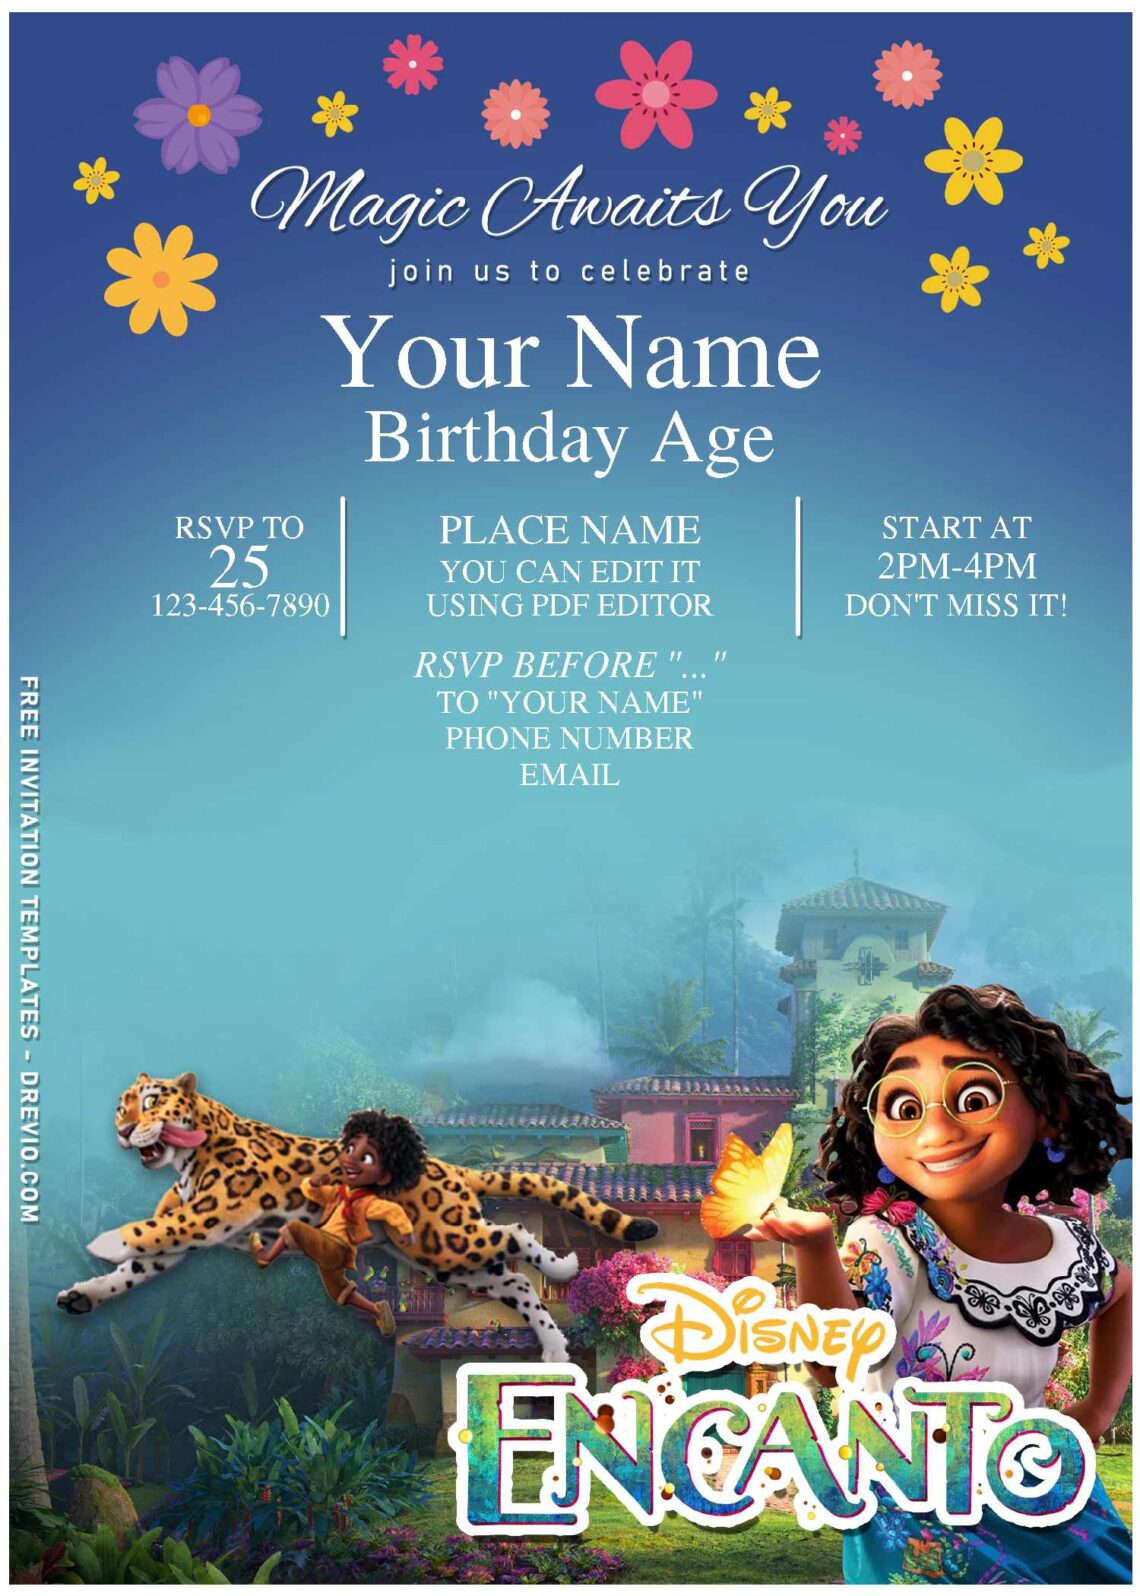 (Free Editable PDF) Disney Encanto Themed Birthday Invitation Templates with cute Antonia and her cute tiger